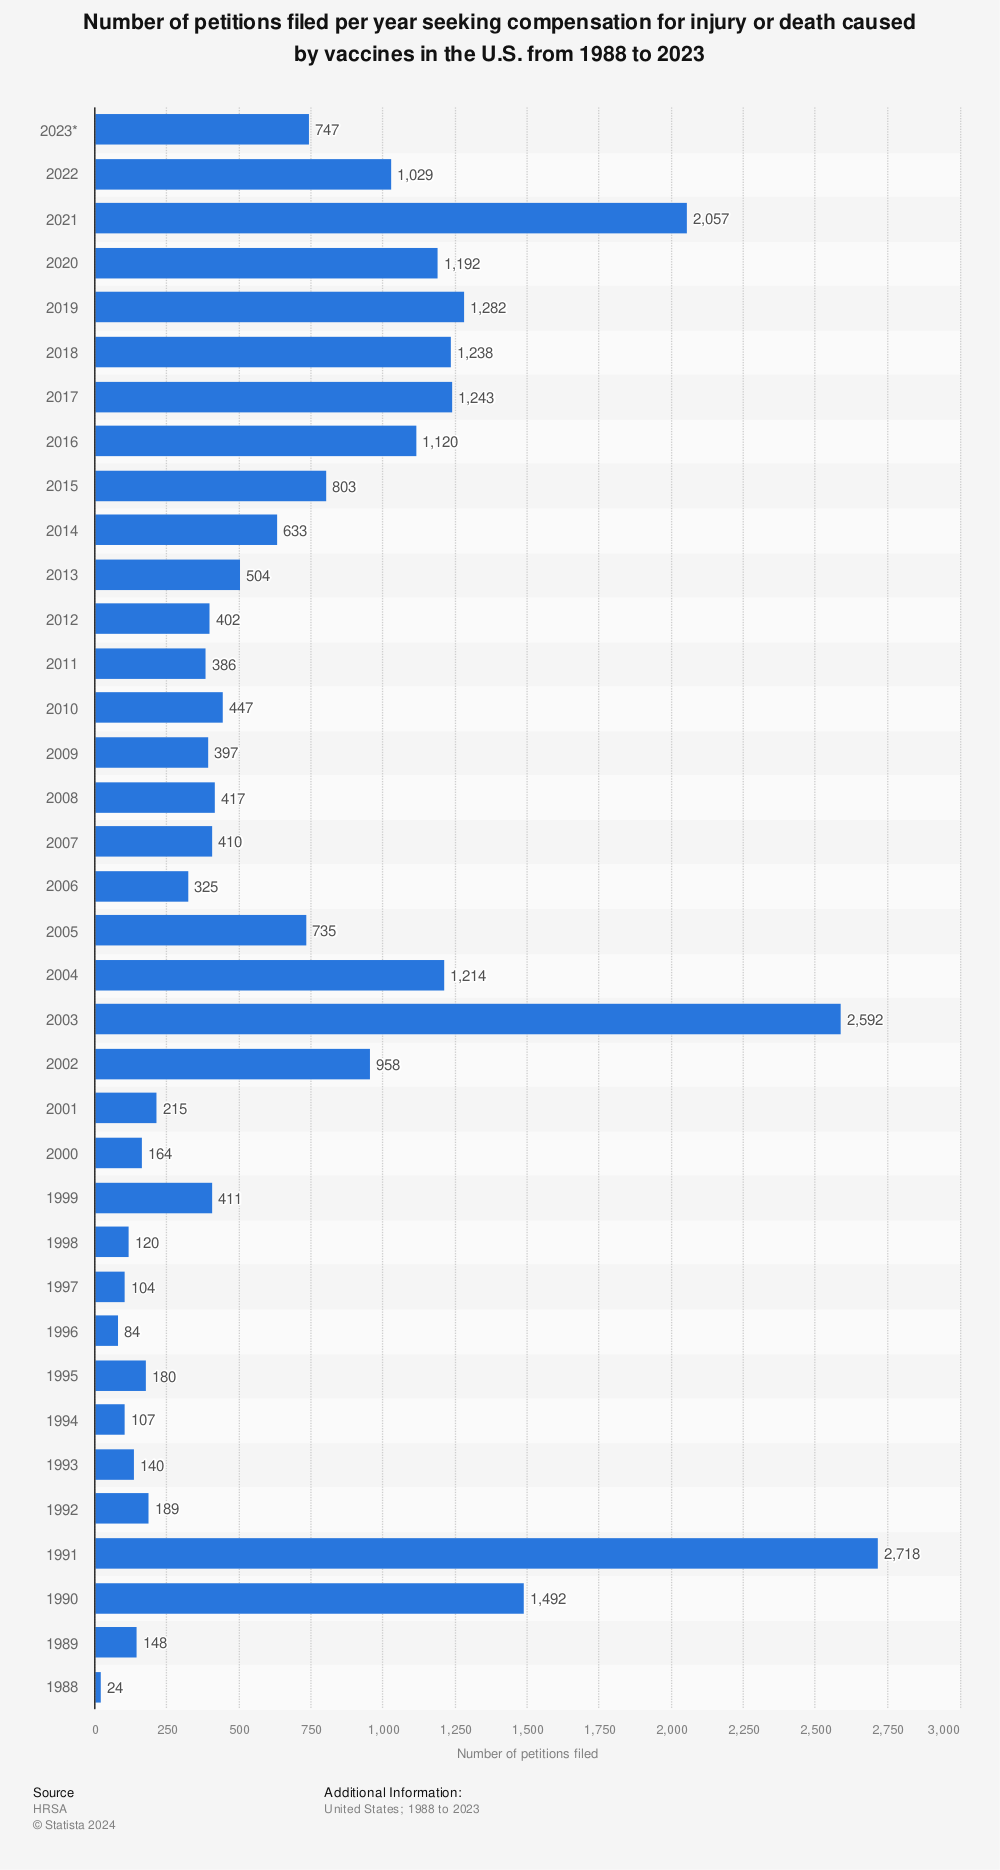 Statistic: Number of petitions filed per year seeking compensation for injury or death caused by vaccines in the U.S. from 1988 to 2021 | Statista